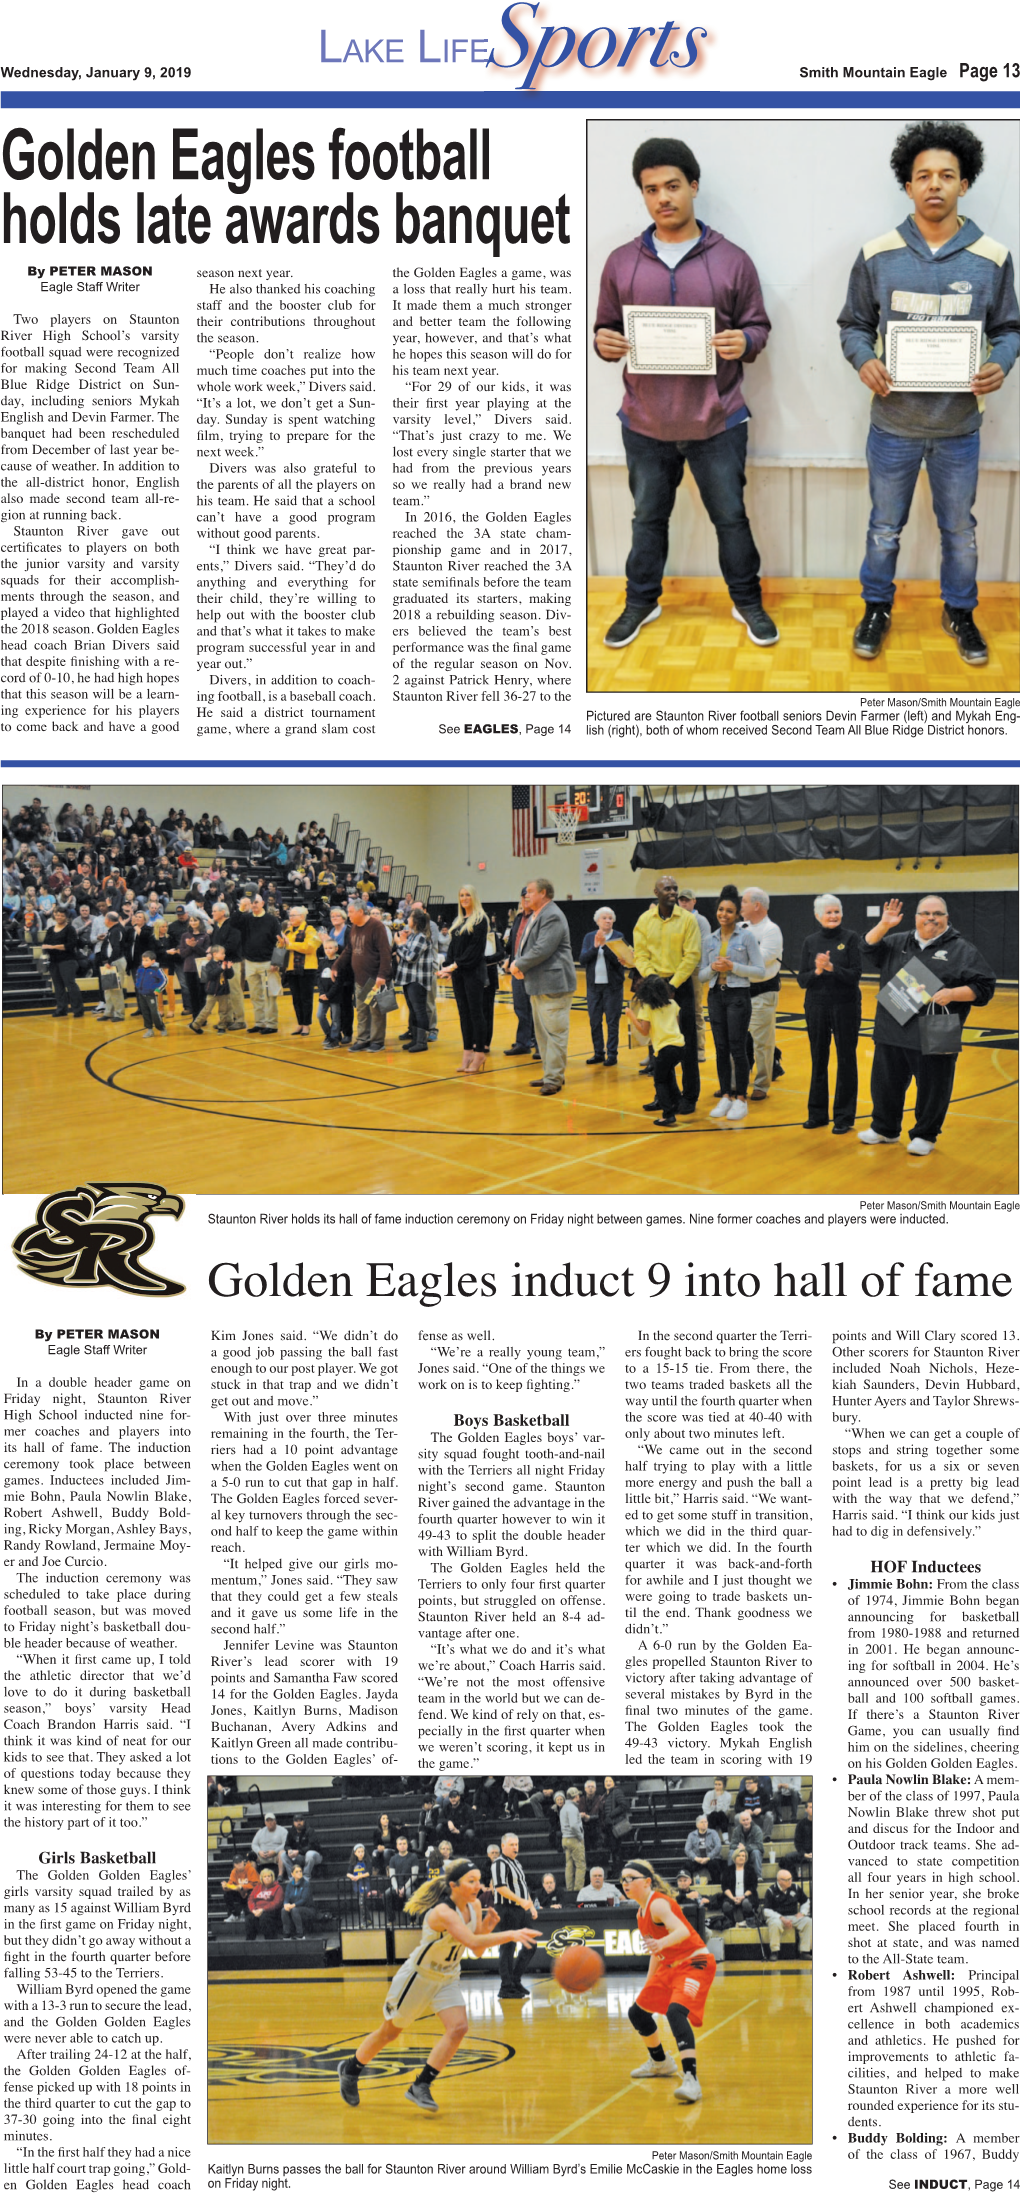 Golden Eagles Football Holds Late Awards Banquet by PETER MASON Season Next Year